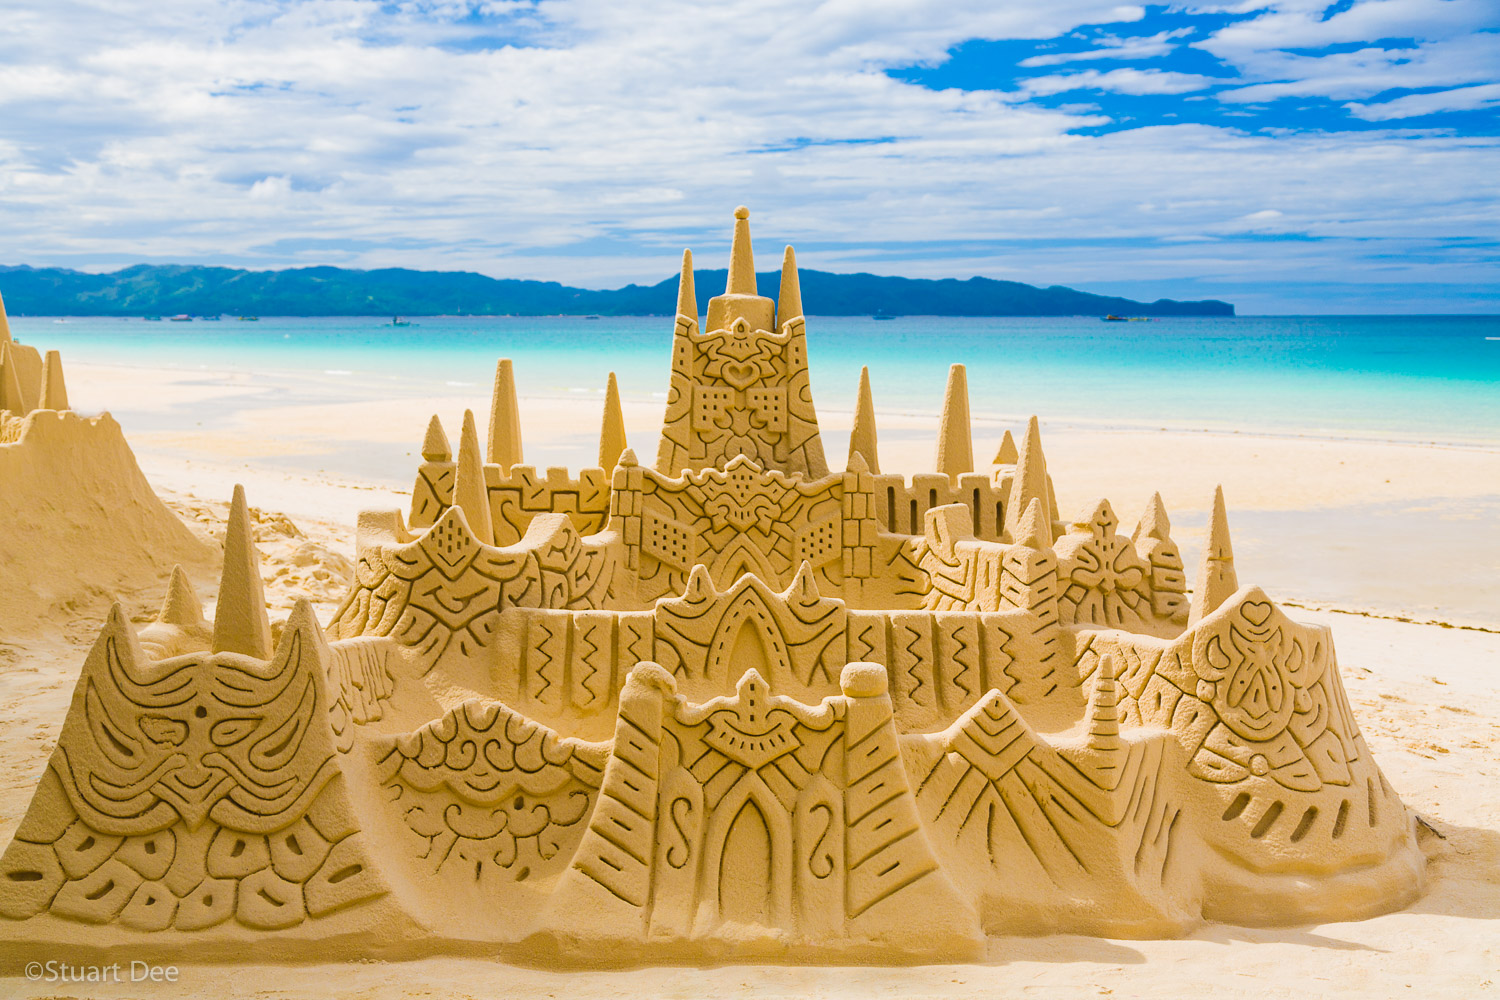  Large sandcastle on white sand beach, White Beach, Boracay, Aklan, Philippines. Boracay is the most famous beach in the Philippines, ranked as one of the best in the world. 